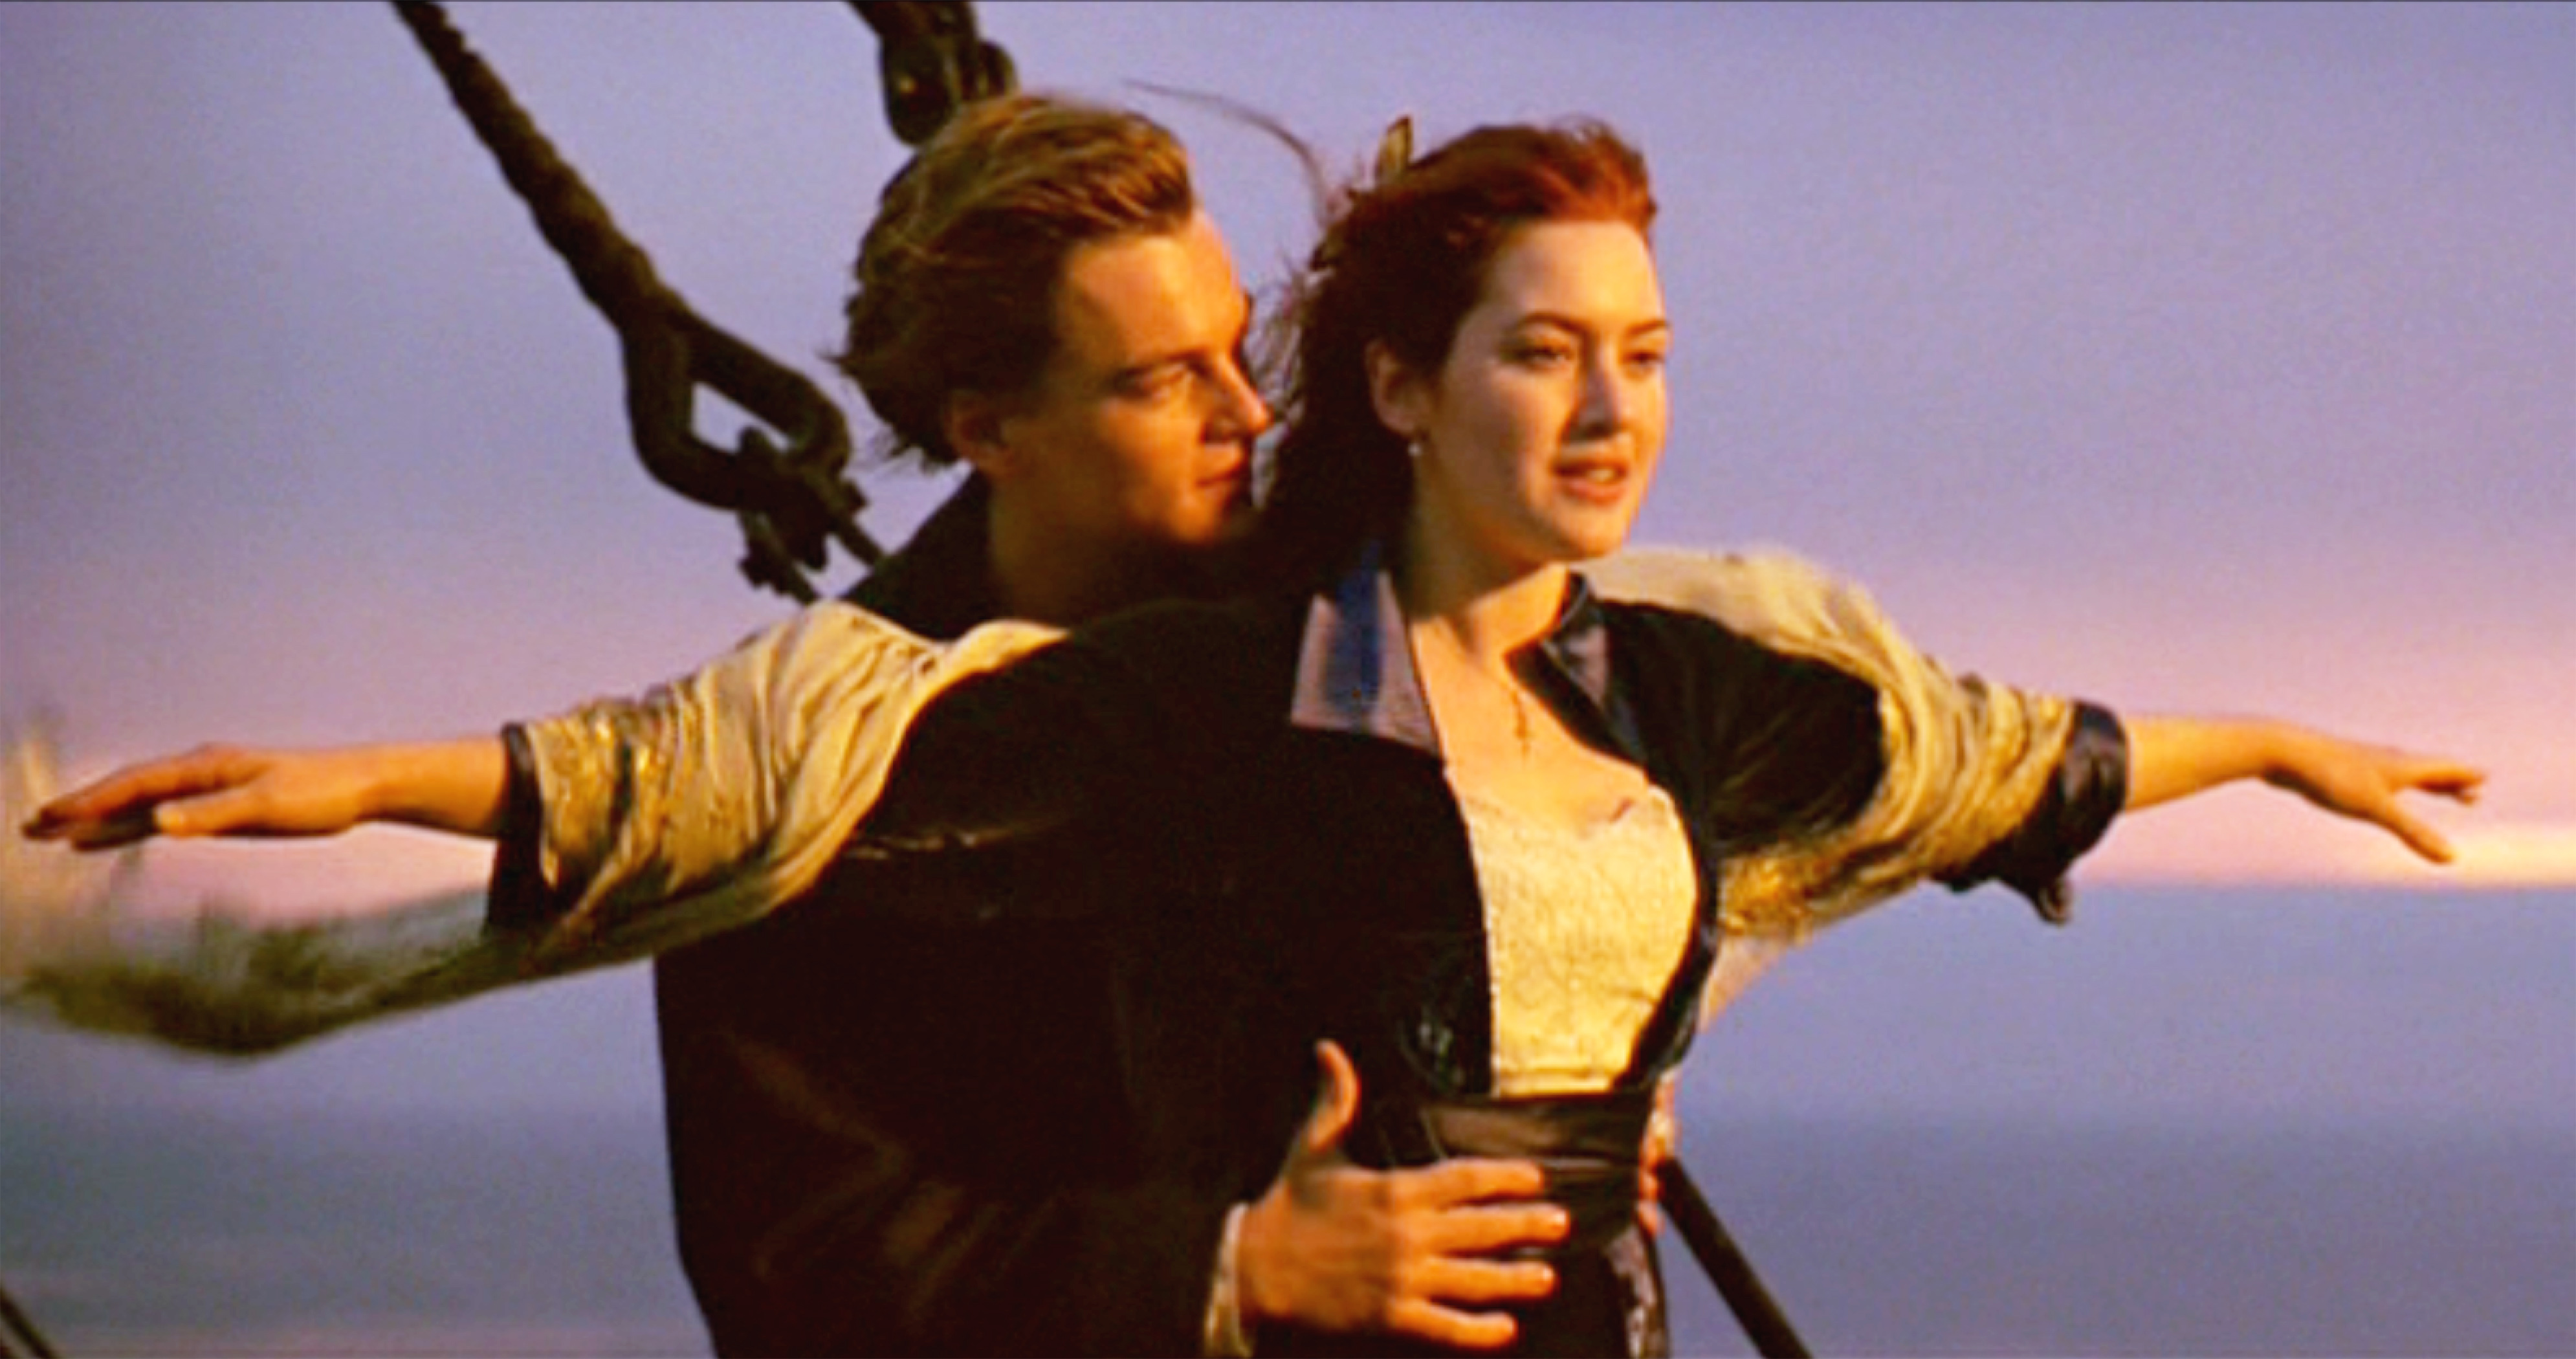 Leonardo DiCaprio as Jack and Kate Winslet as Rose in the movie, "Titanic," in 1997 | Source: Getty Images